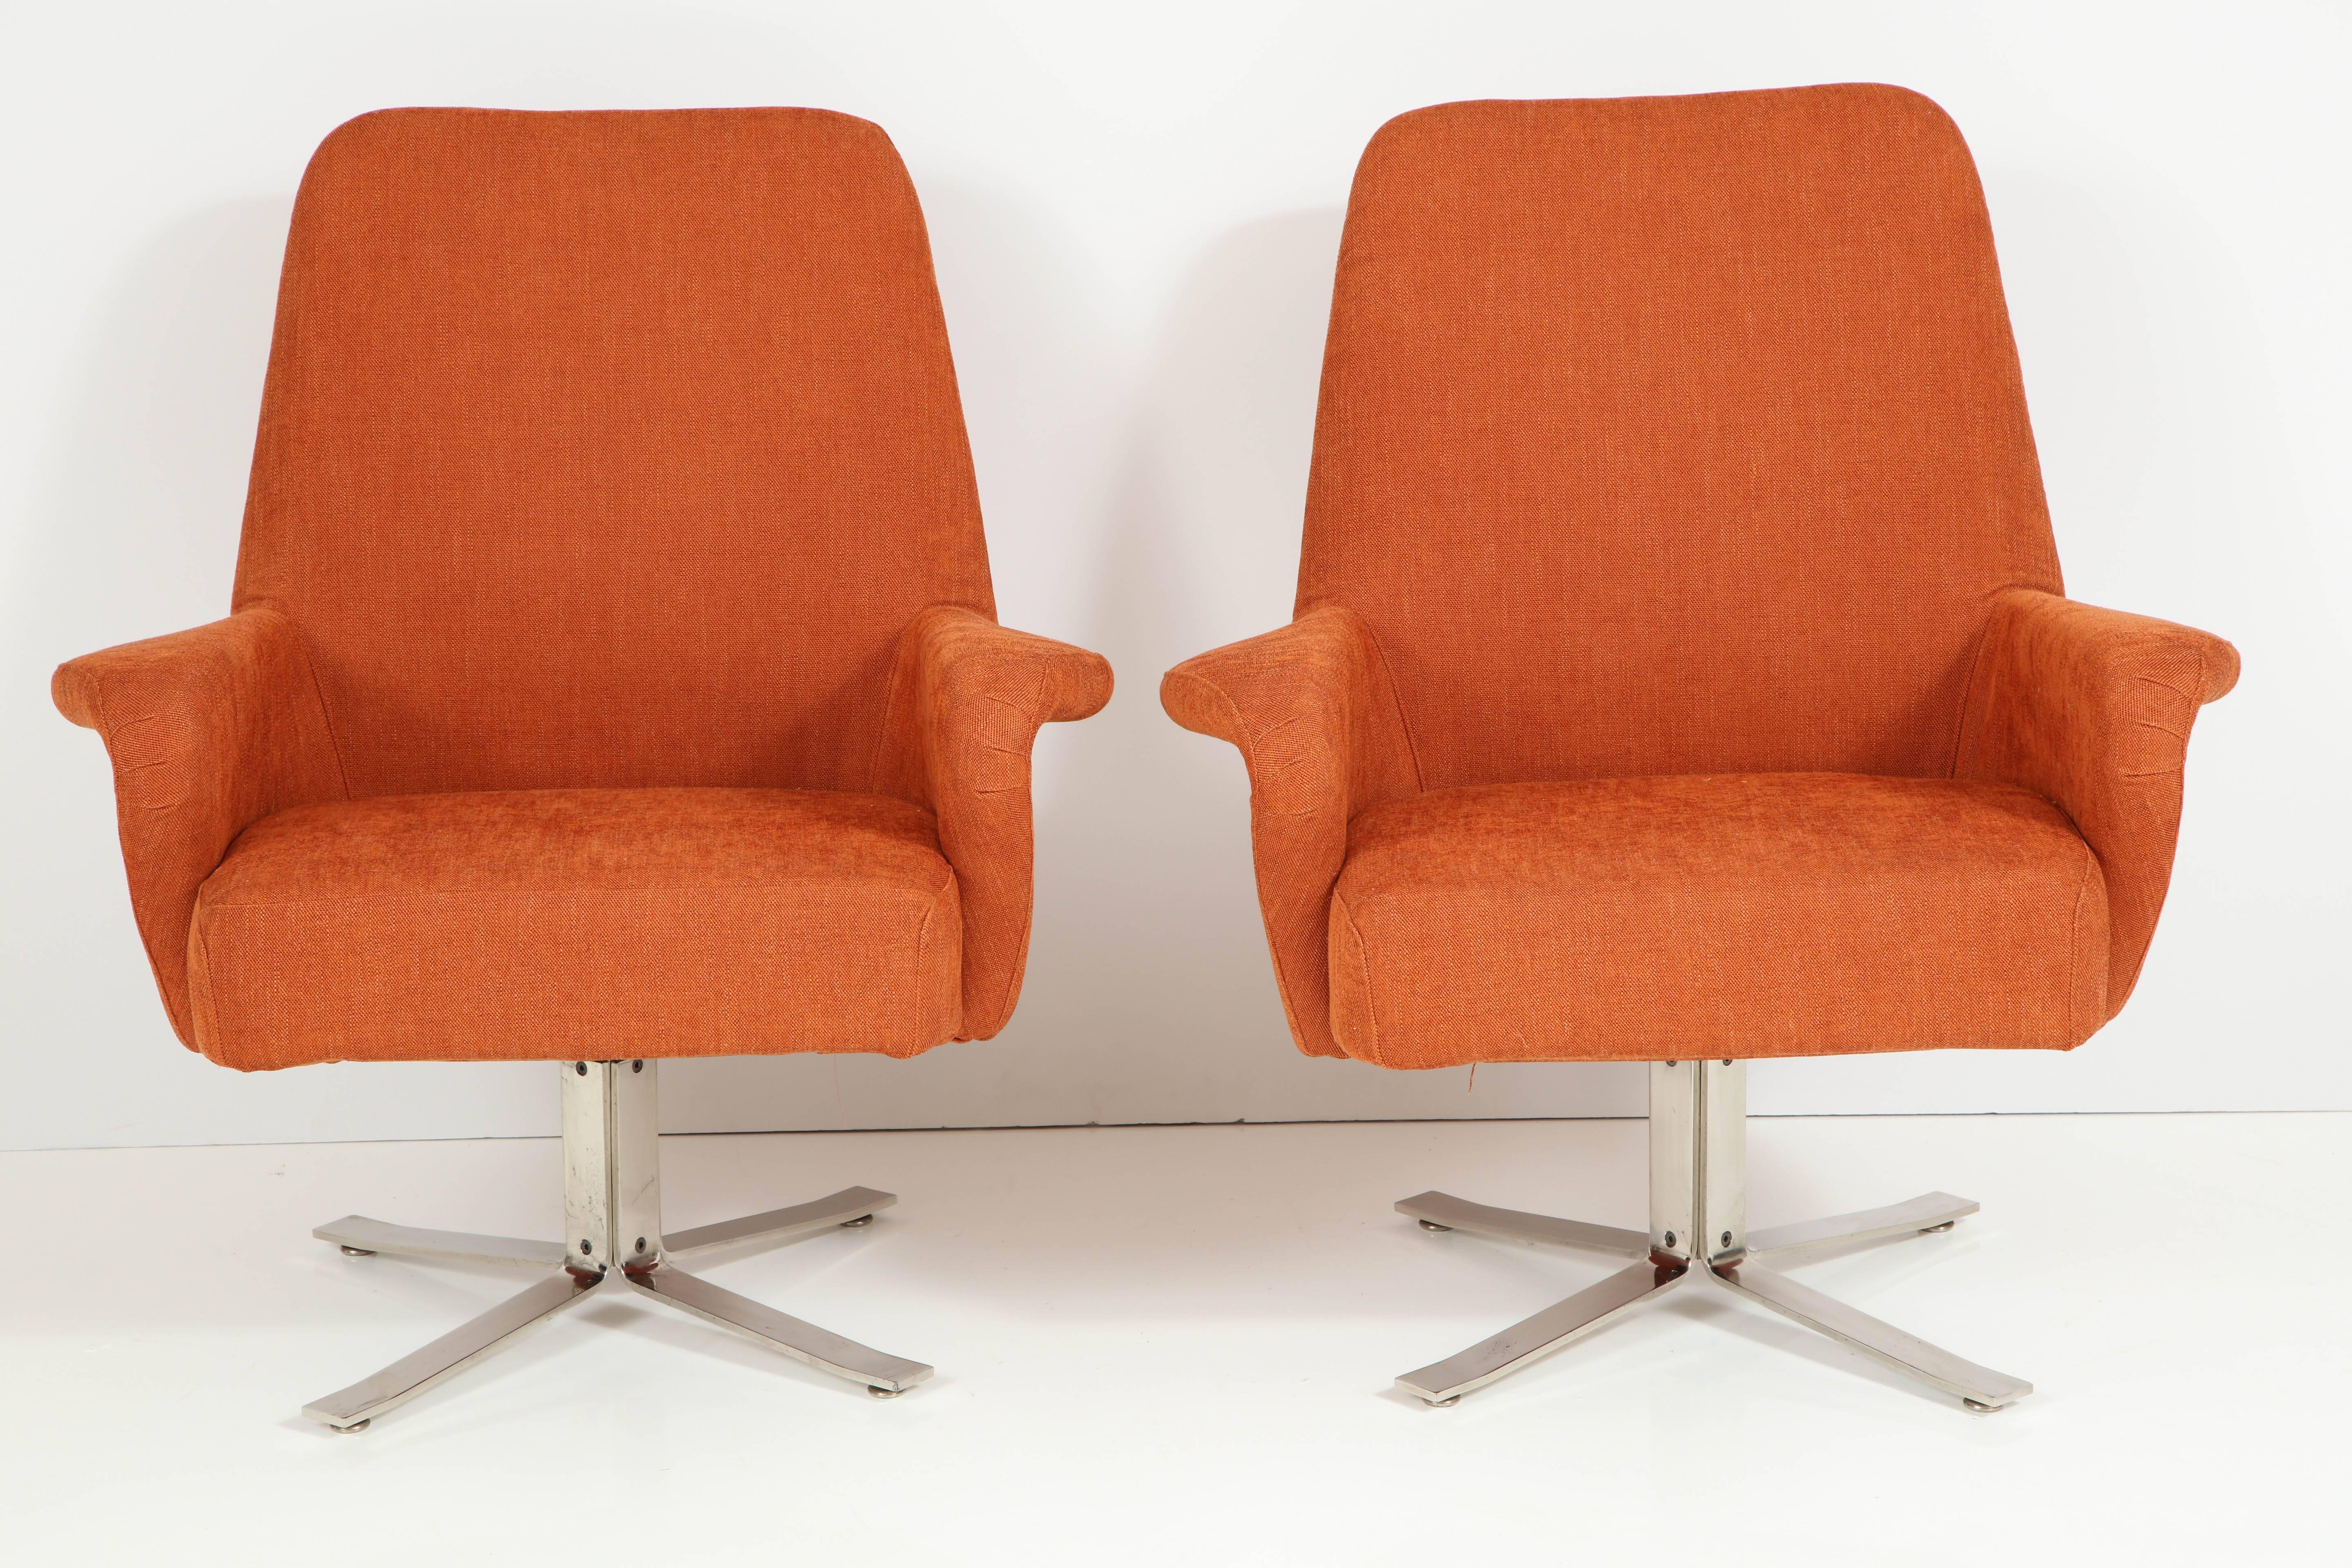 Pair of swivel chairs by Giani Moscatelli for Forma Nova Italy, polished nickel bases, upholstered in cotton fabric. A very comfortable chair.